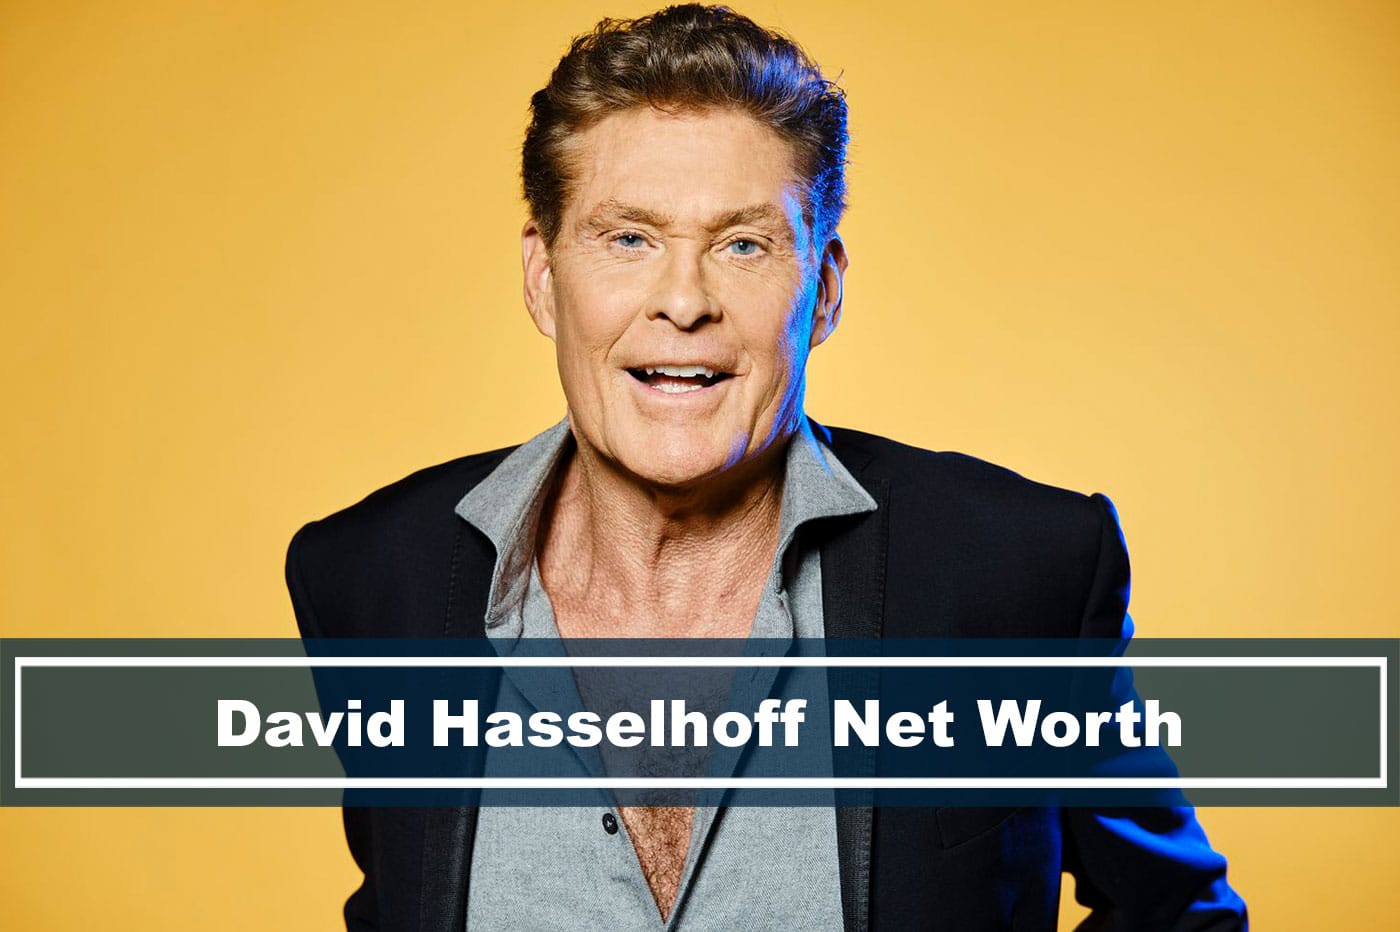 David Hasselhoff Net Worth: Facts You Should not Miss about the “Baywatch” Star